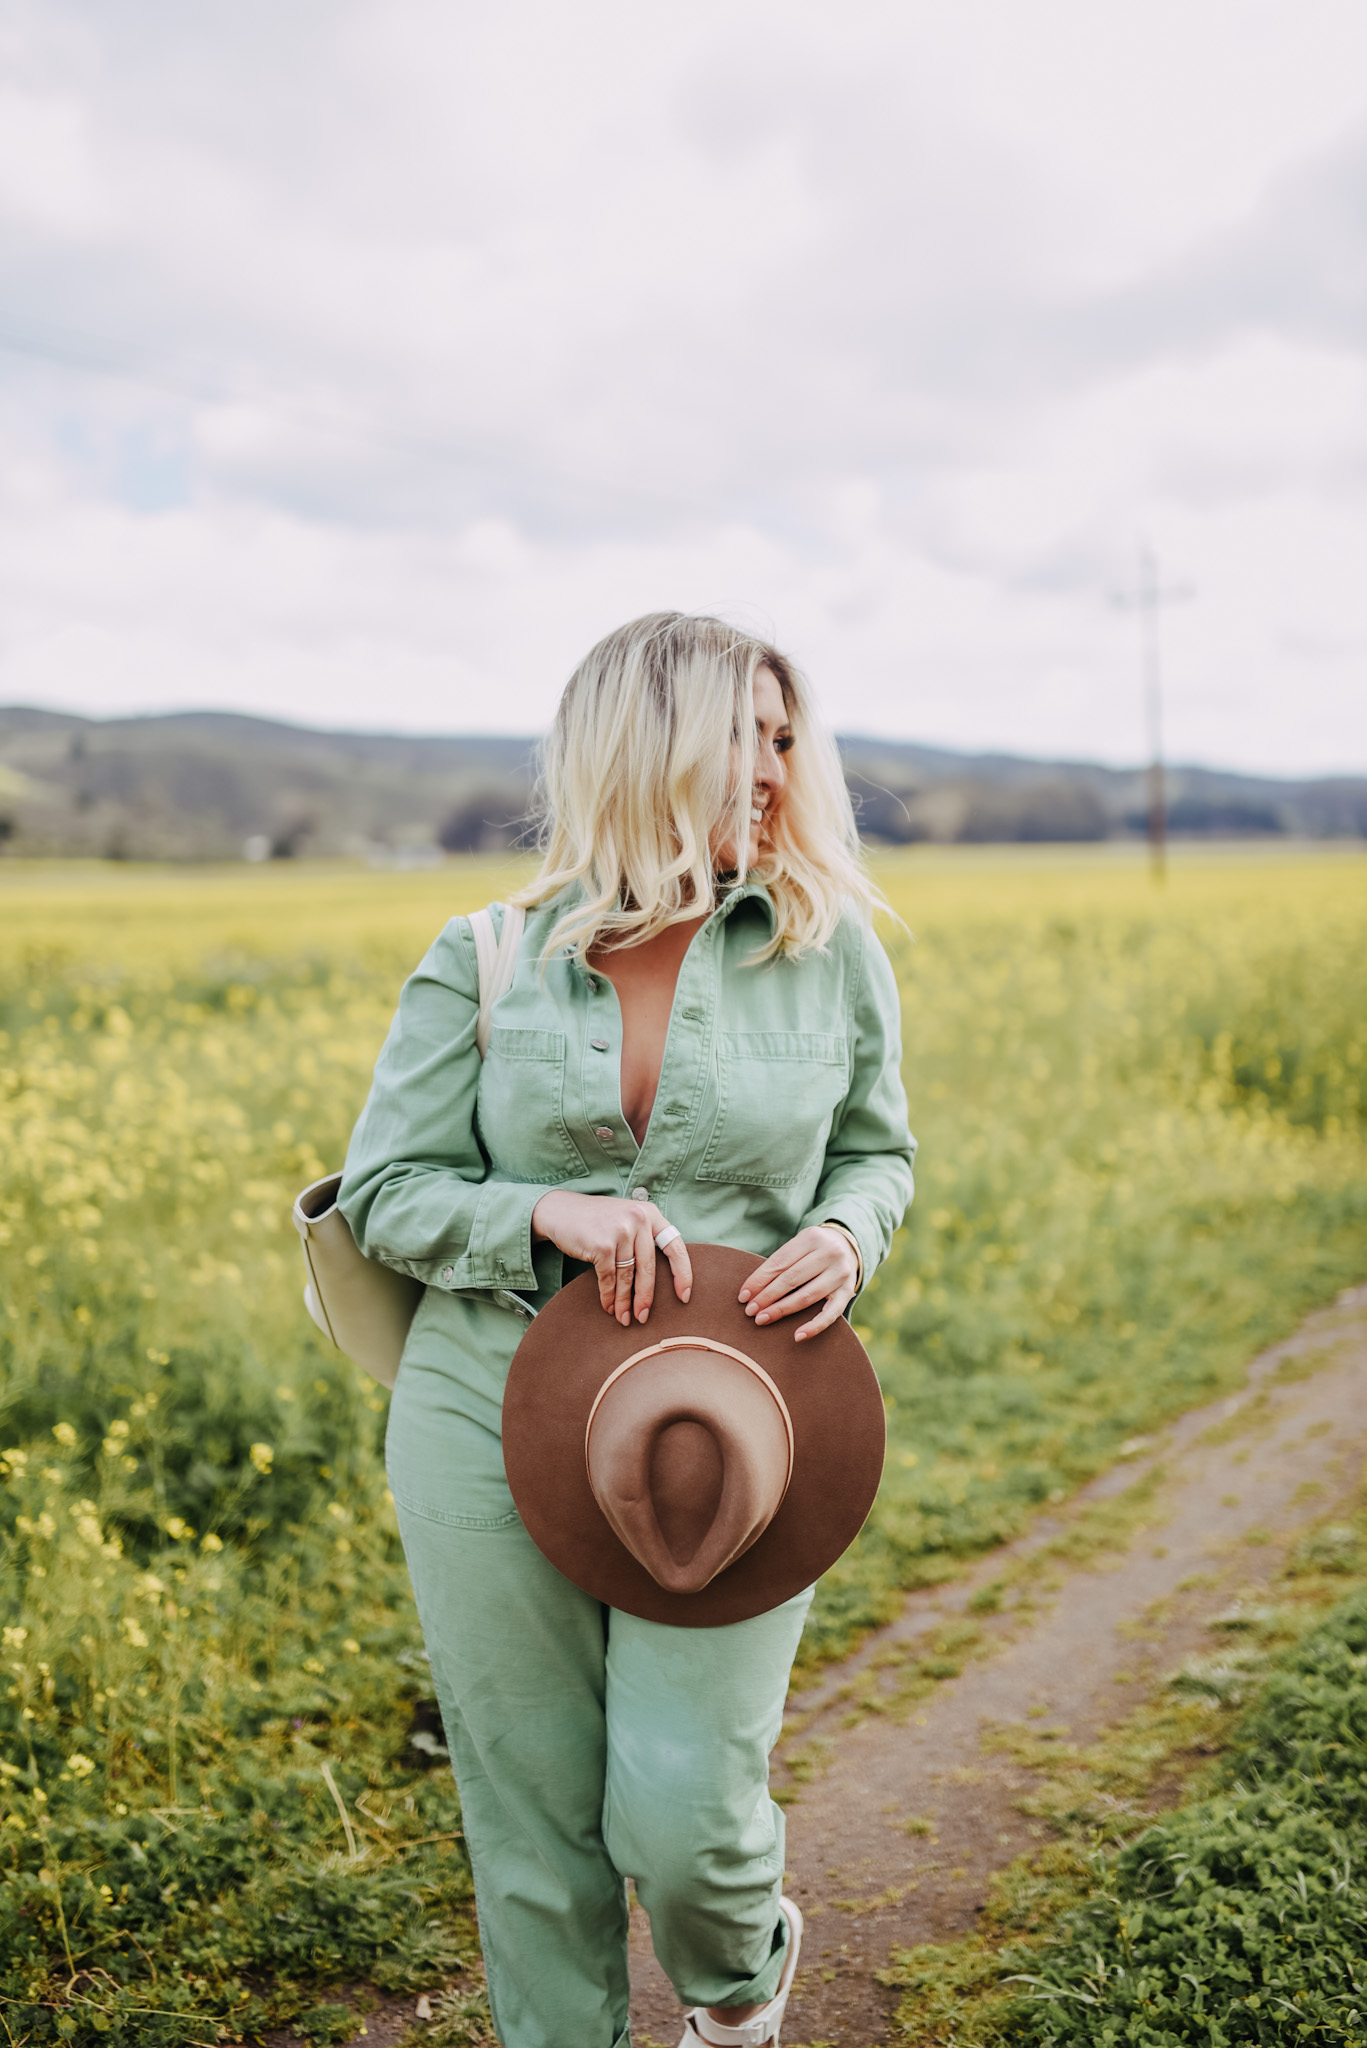 KatWalkSF wearing the Madewell Coverall Jumpsuit at the Half Moon Bay Superbloom